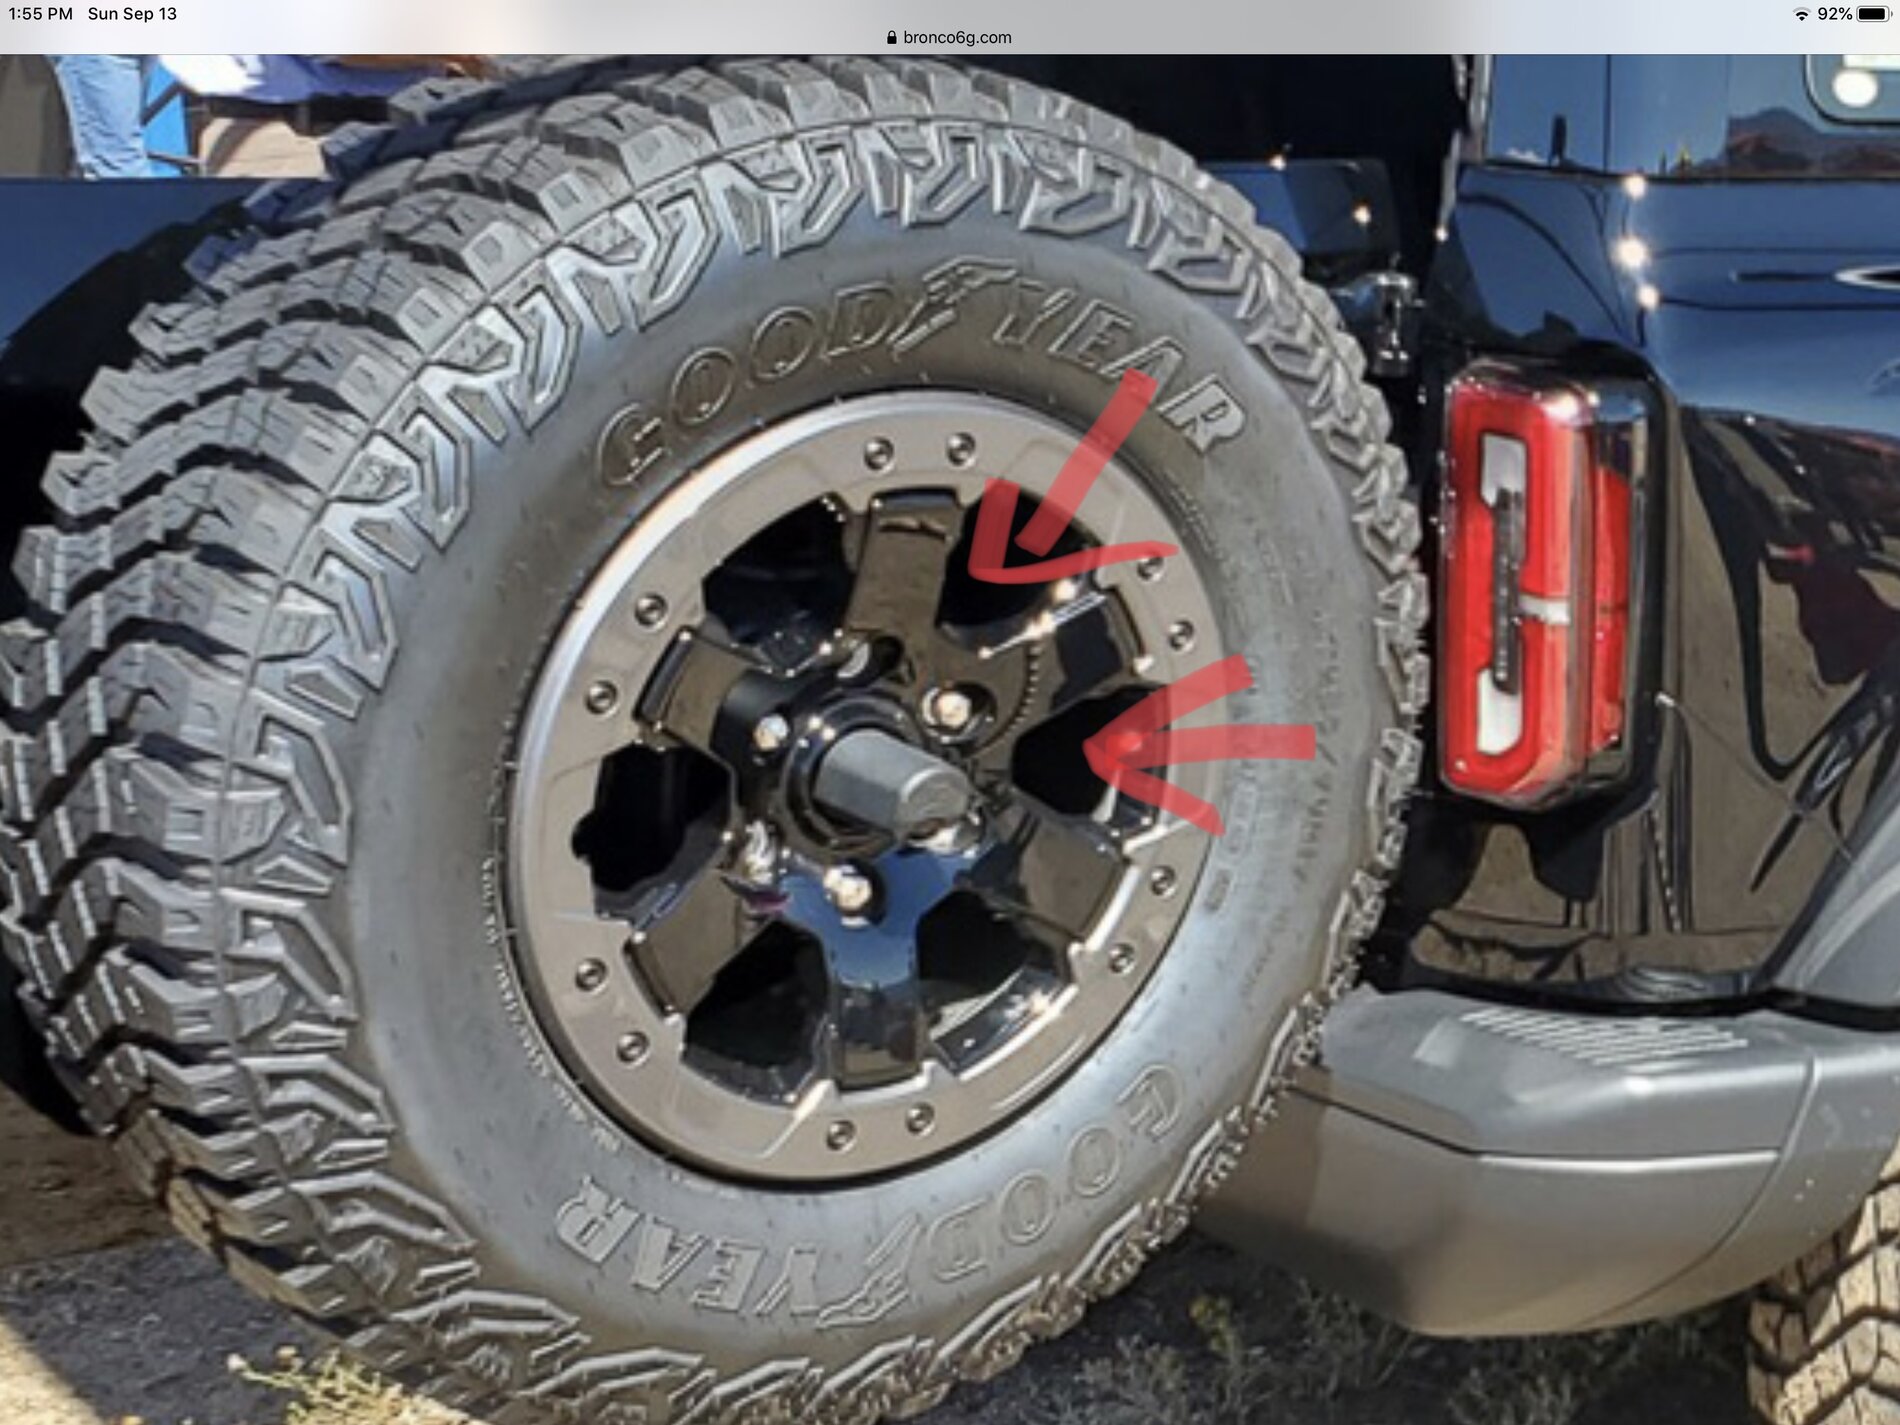 Ford Bronco What are the wheel choices on Badlands?  Pics of what we’ve seen 1E1DADDC-3A09-4FC4-A4C3-5D14D6778460